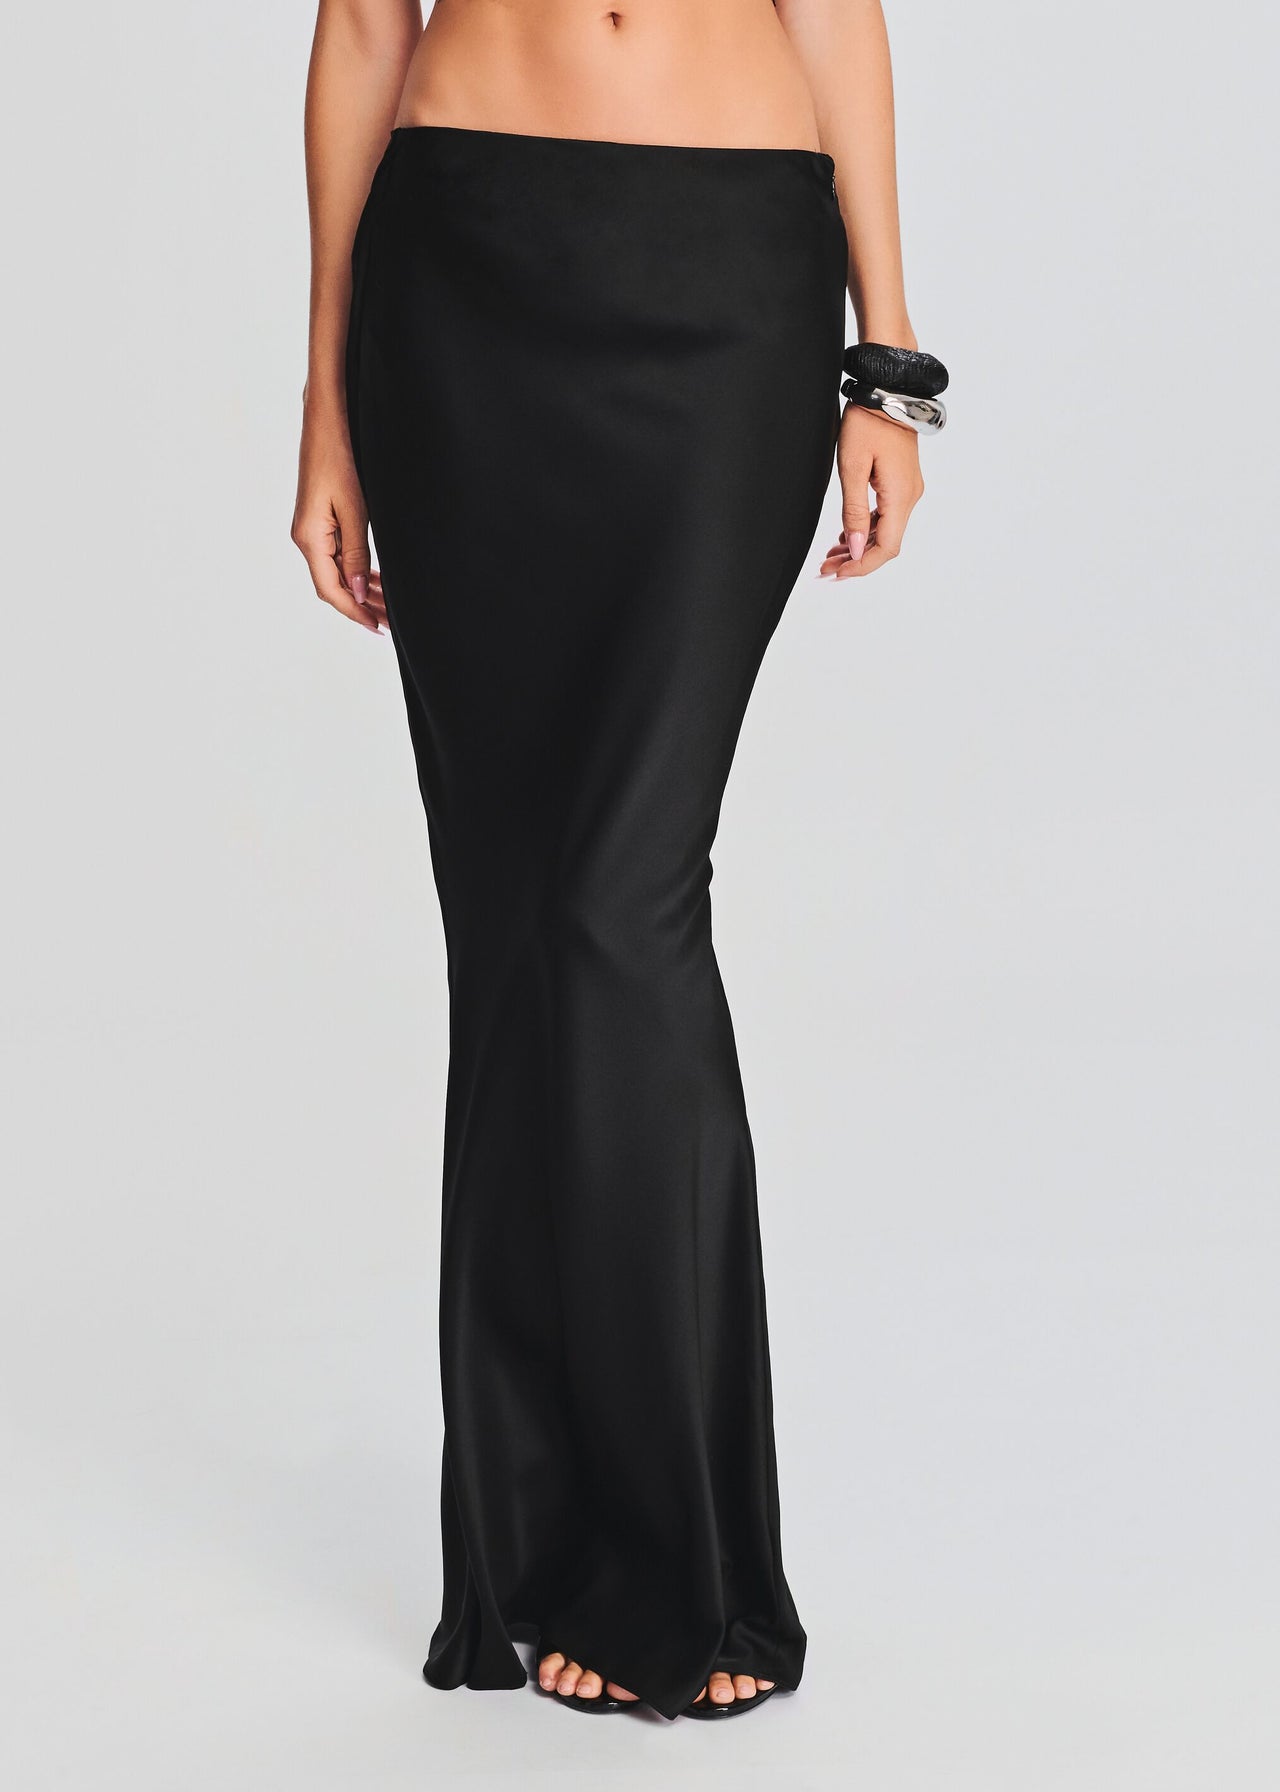 Maxi Skirt Pant in Black - FINAL SALE - Grace and Lace